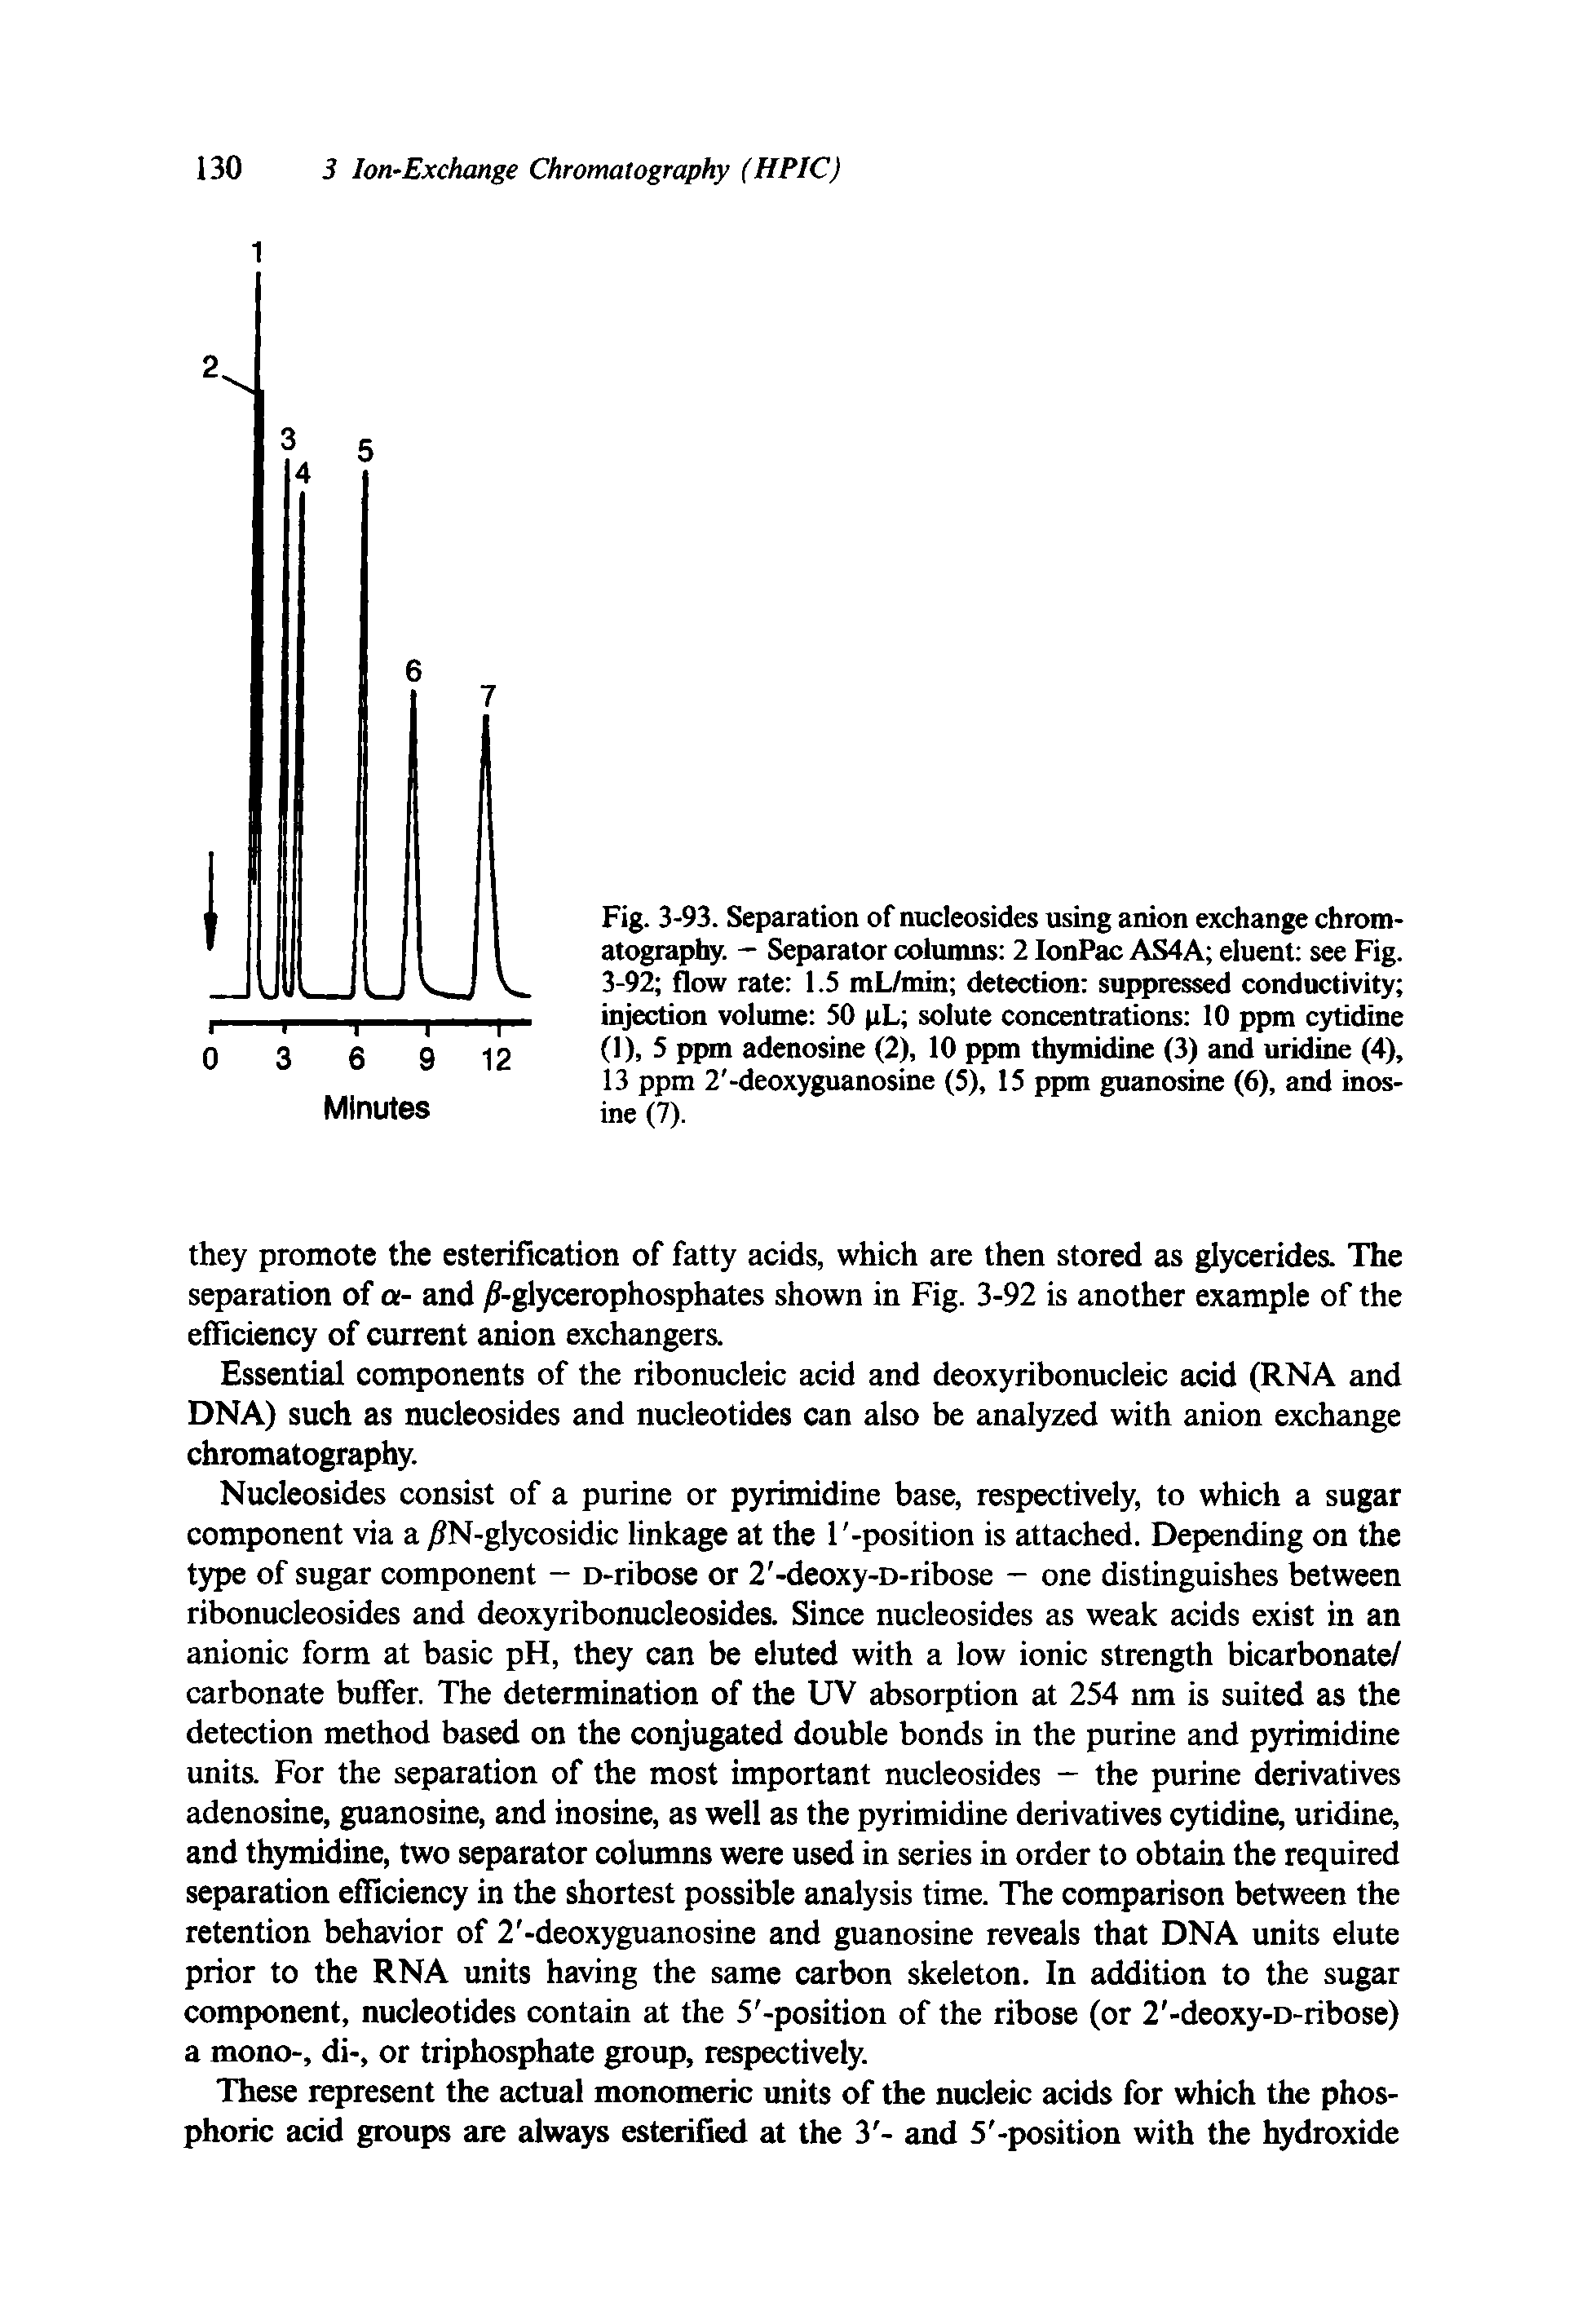 Fig. 3-93. Separation of nucleosides using anion exchange chromatography. — Separator columns 2 IonPac AS4A eluent see Fig. 3-92 flow rate 1.5 mL/min detection suppressed conductivity injection volume 50 pL solute concentrations 10 ppm cytidine (1), 5 ppm adenosine (2), 10 ppm thymidine (3) and uridine (4), 13 ppm 2 -deoxyguanosine (5), 15 ppm guanosine (6), and inos-ine (7).